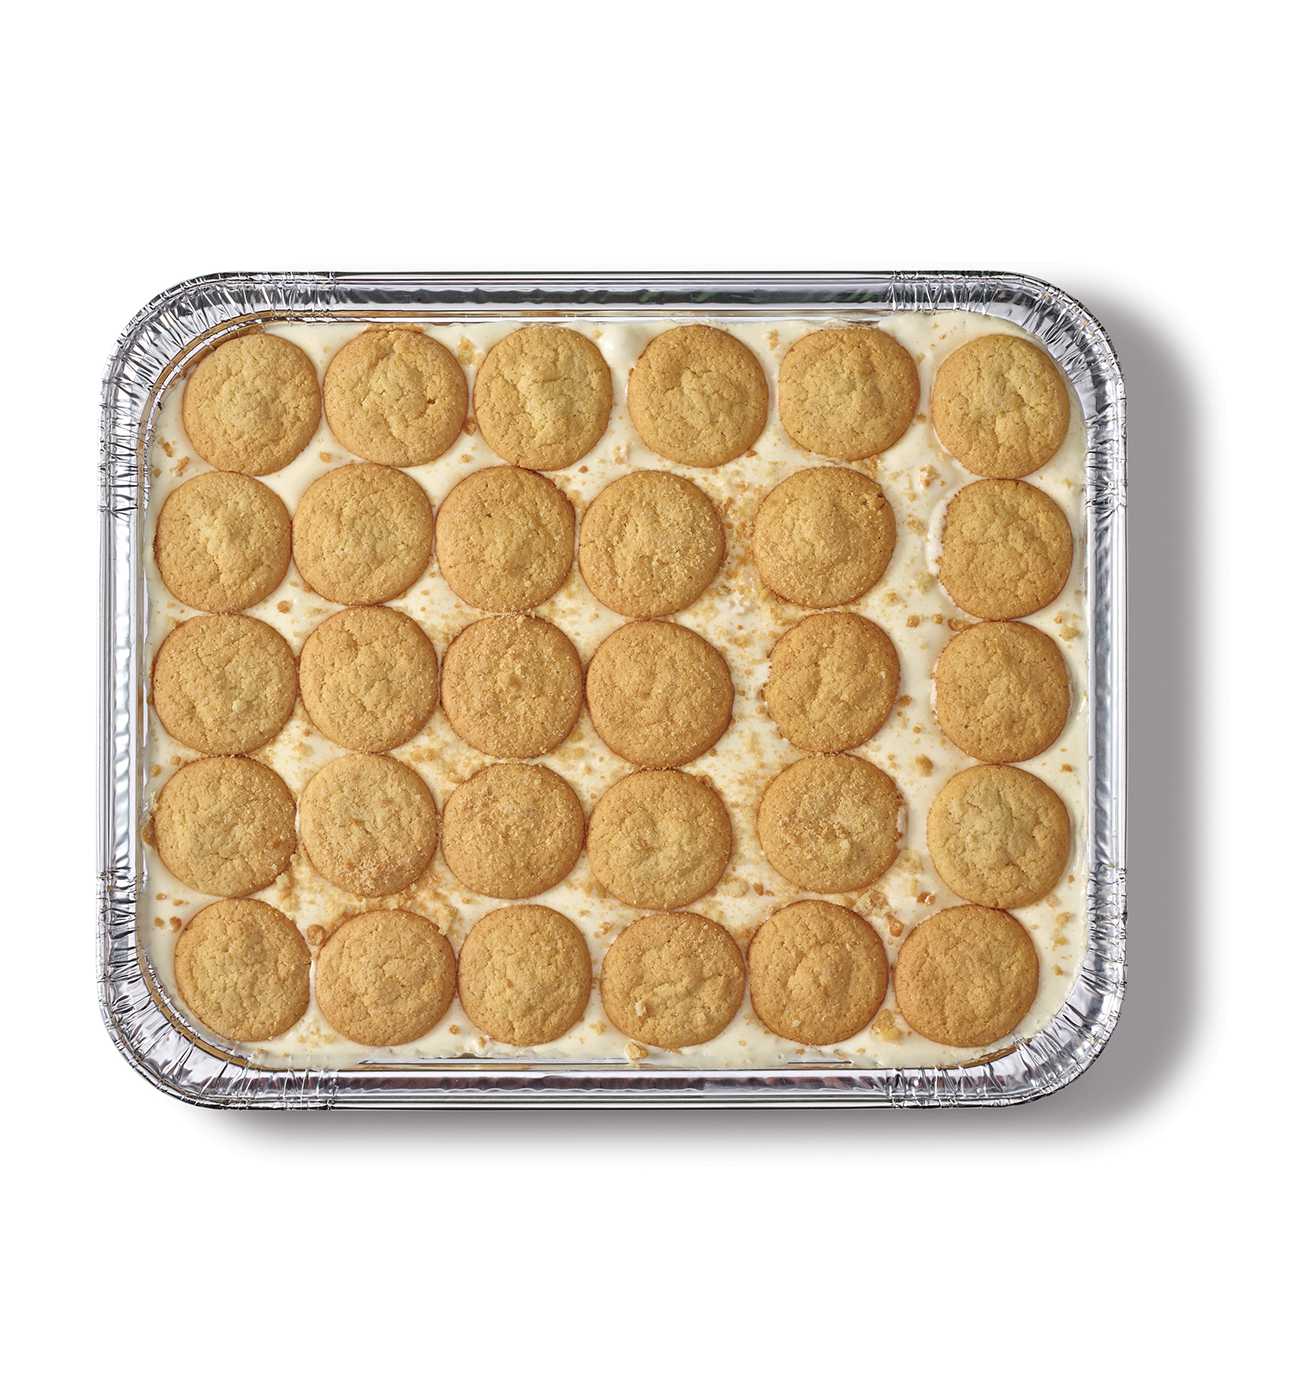 True Texas BBQ Banana Pudding - Texas-Size Pack; image 1 of 2